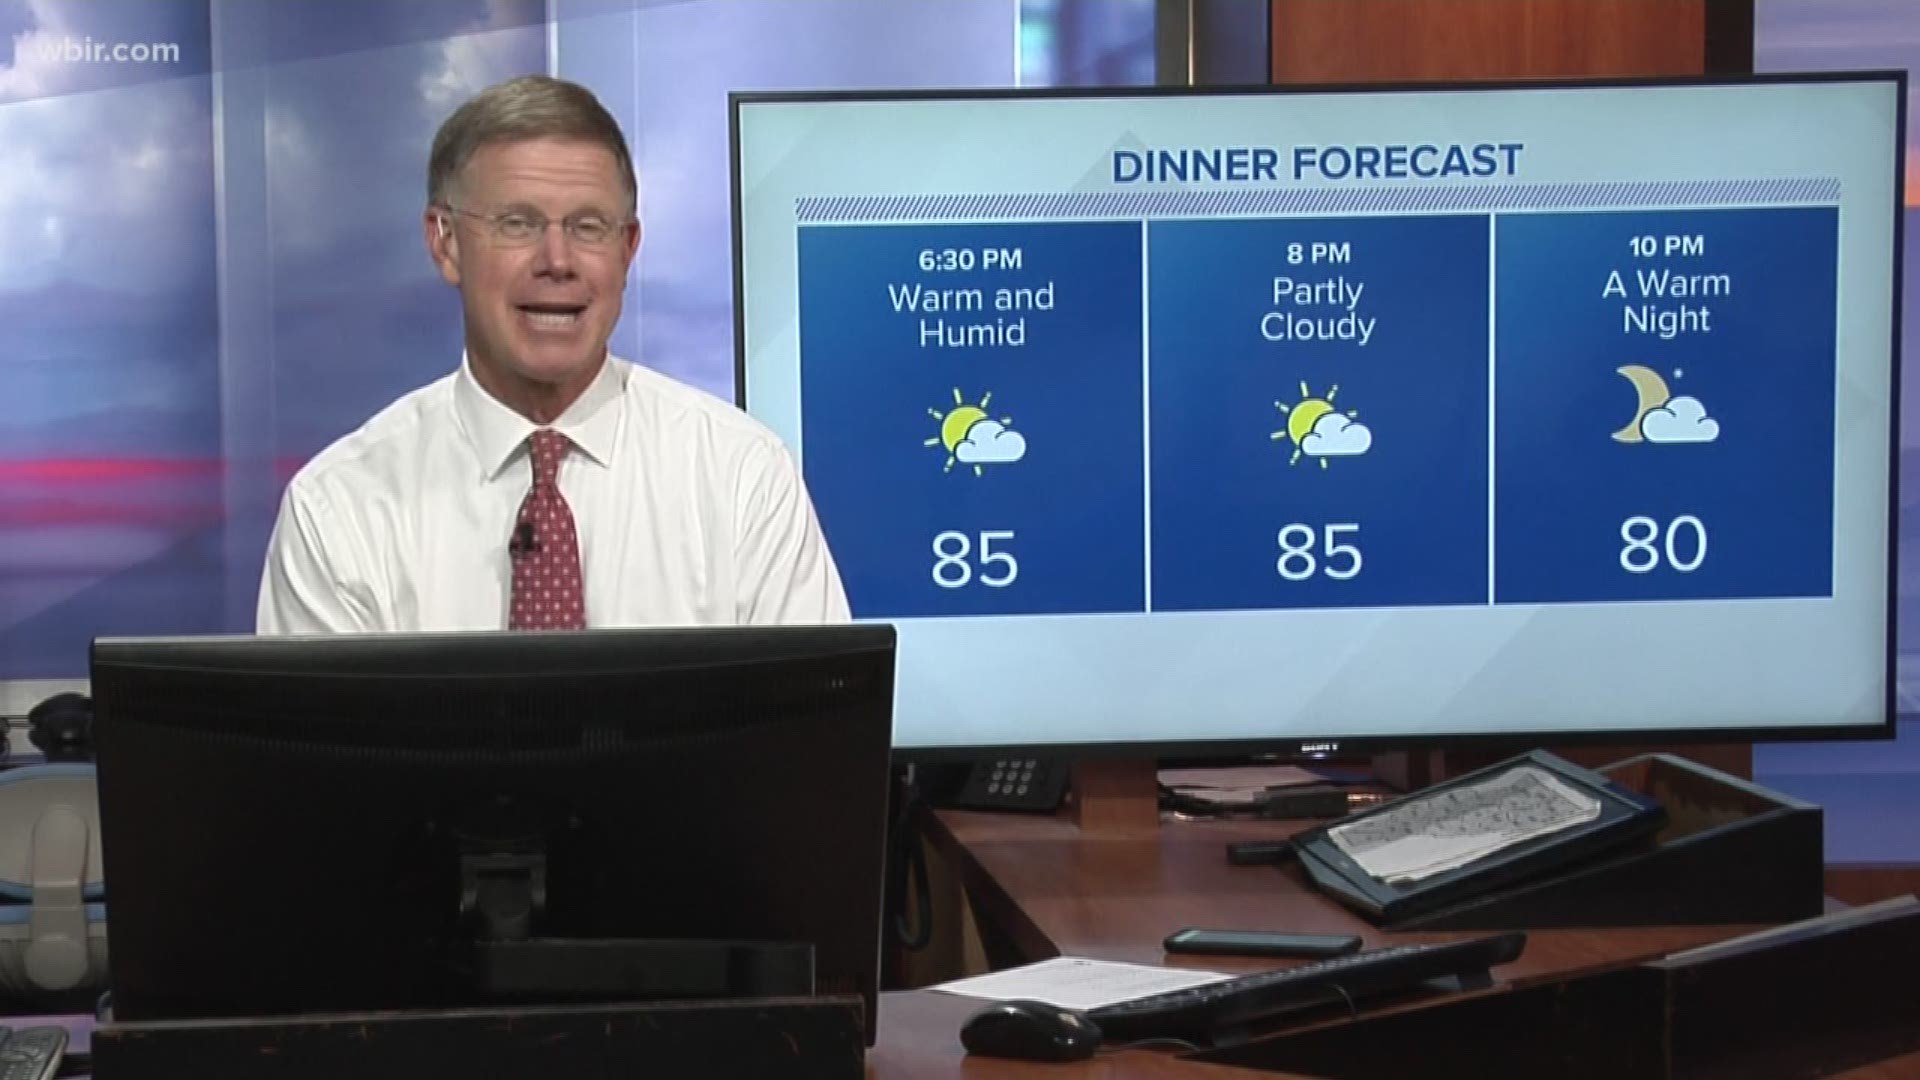 Dinner forecast for Monday, July 15, 2019 at 6 p.m.